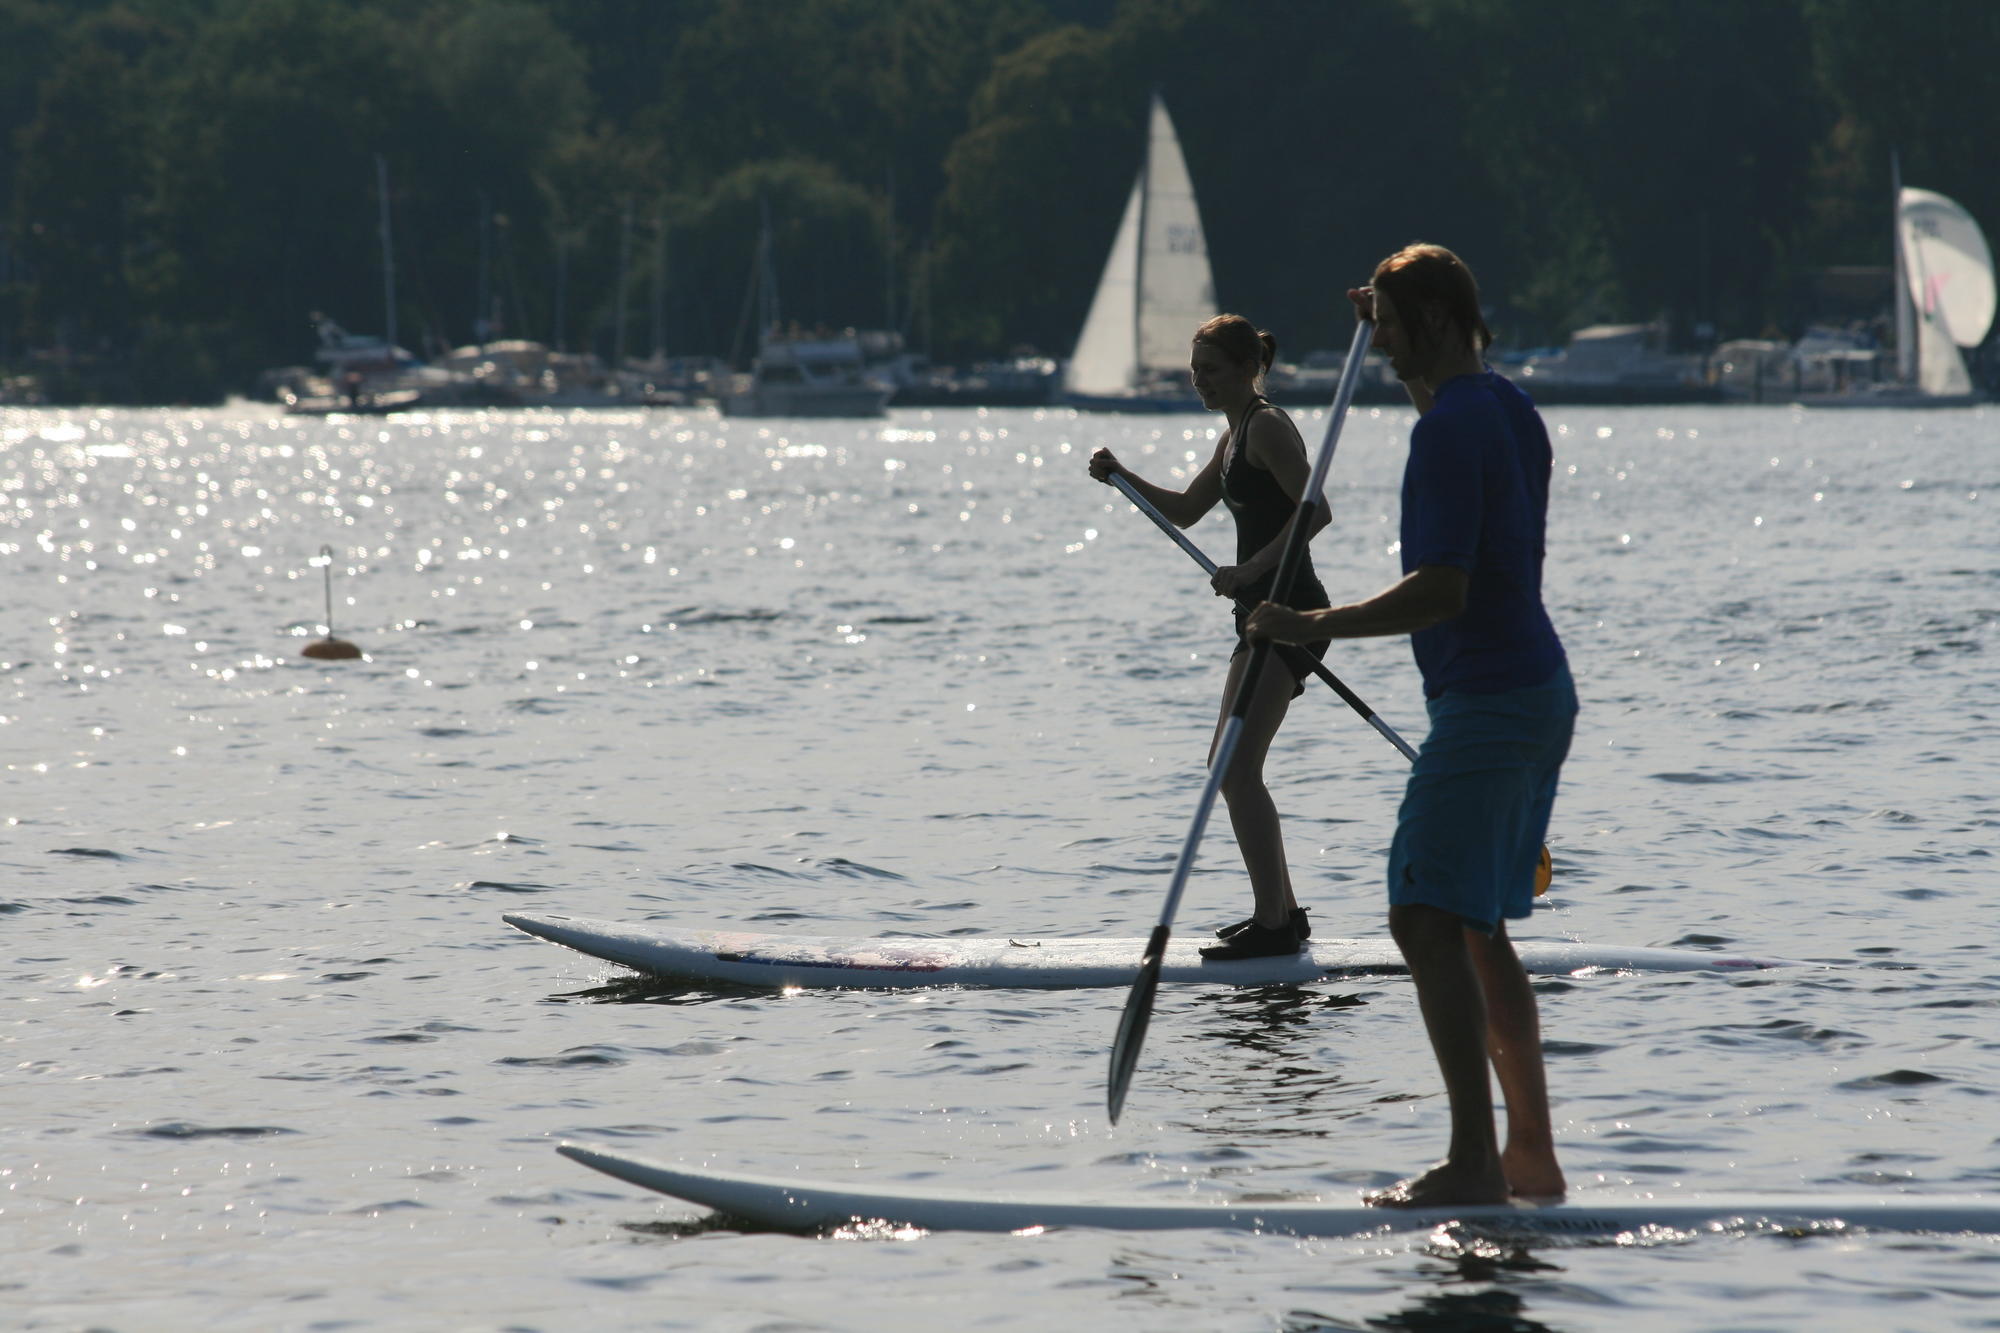 Stand up Paddling (SUP)